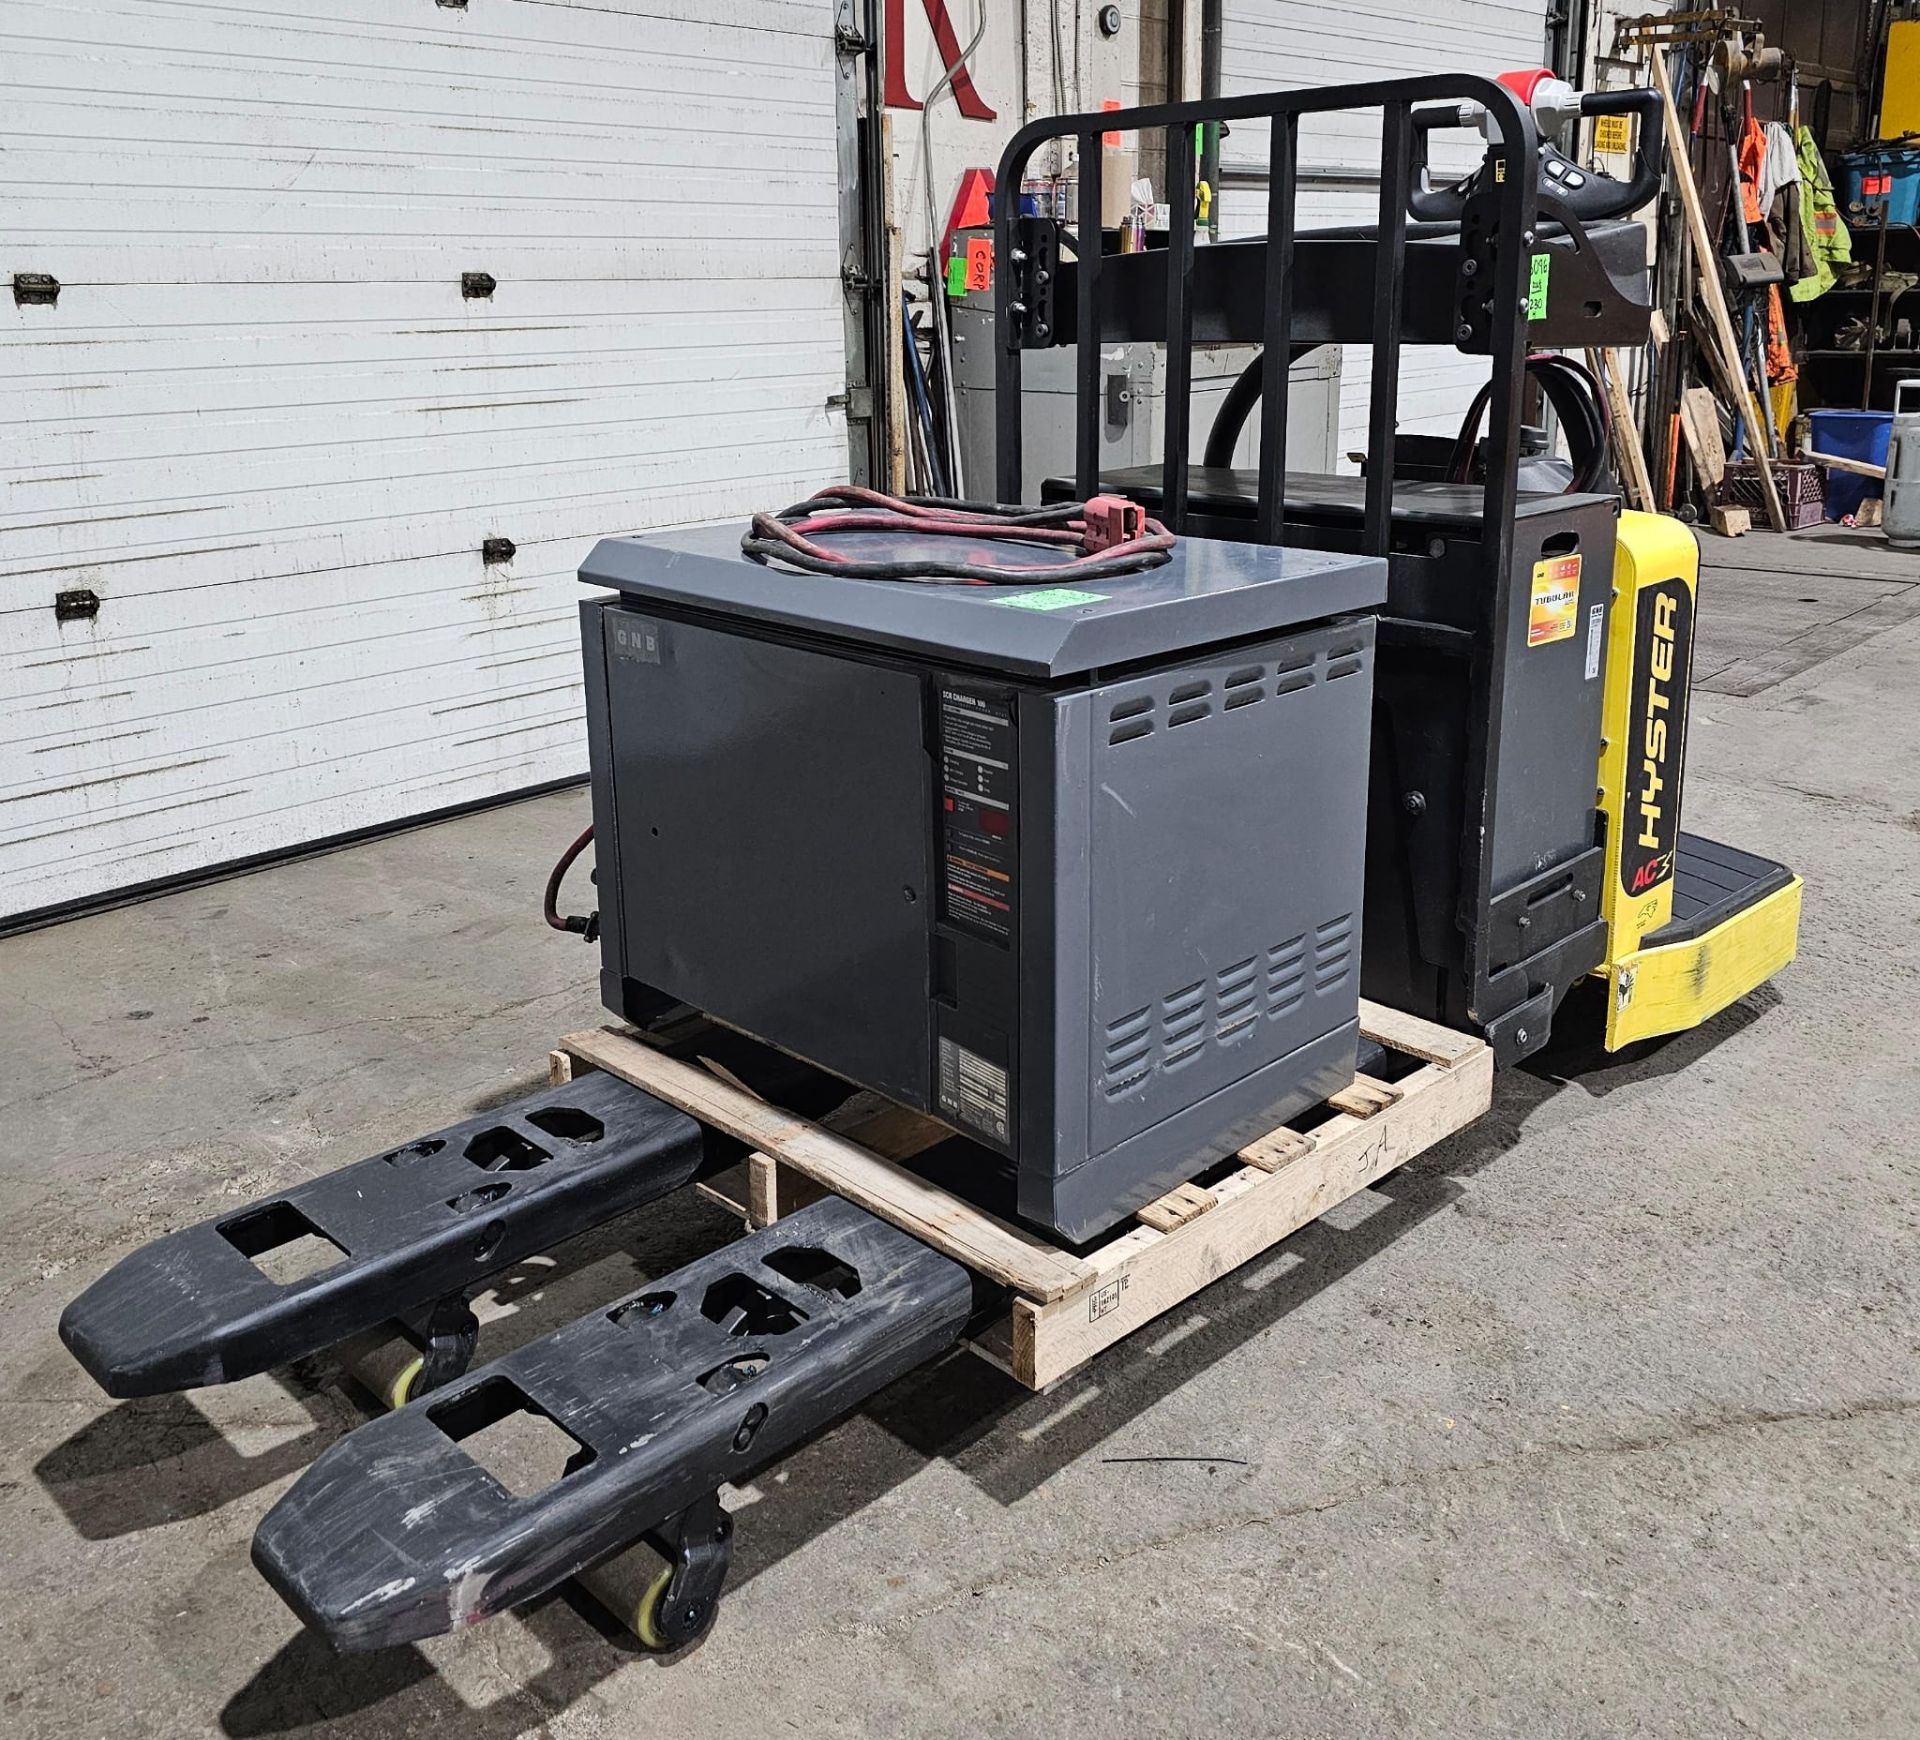 2018 Hyster Ride-On Walkie 8,000lbs Capacity 60" Forks Electric Pallet Cart with CHARGER - Image 3 of 11